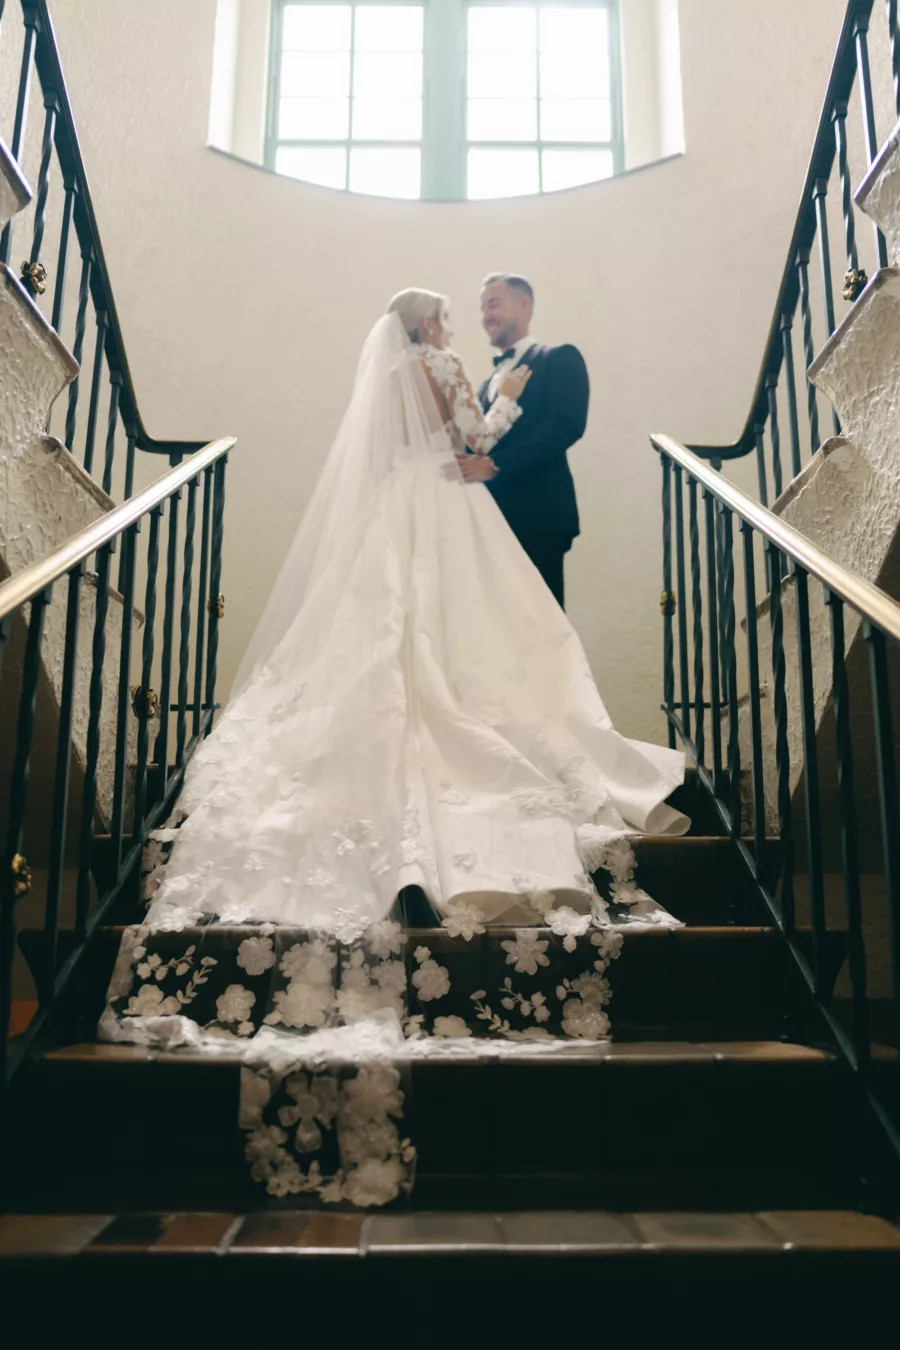 Intimate Bride and Groom First Look Wedding Portrait | Long Sleeve Embroidered Flower Fit and Flare Anne Barge Solana Wedding Dress with Detachable Train Inspiration | St Pete Historic Hotel Venue The Vinoy